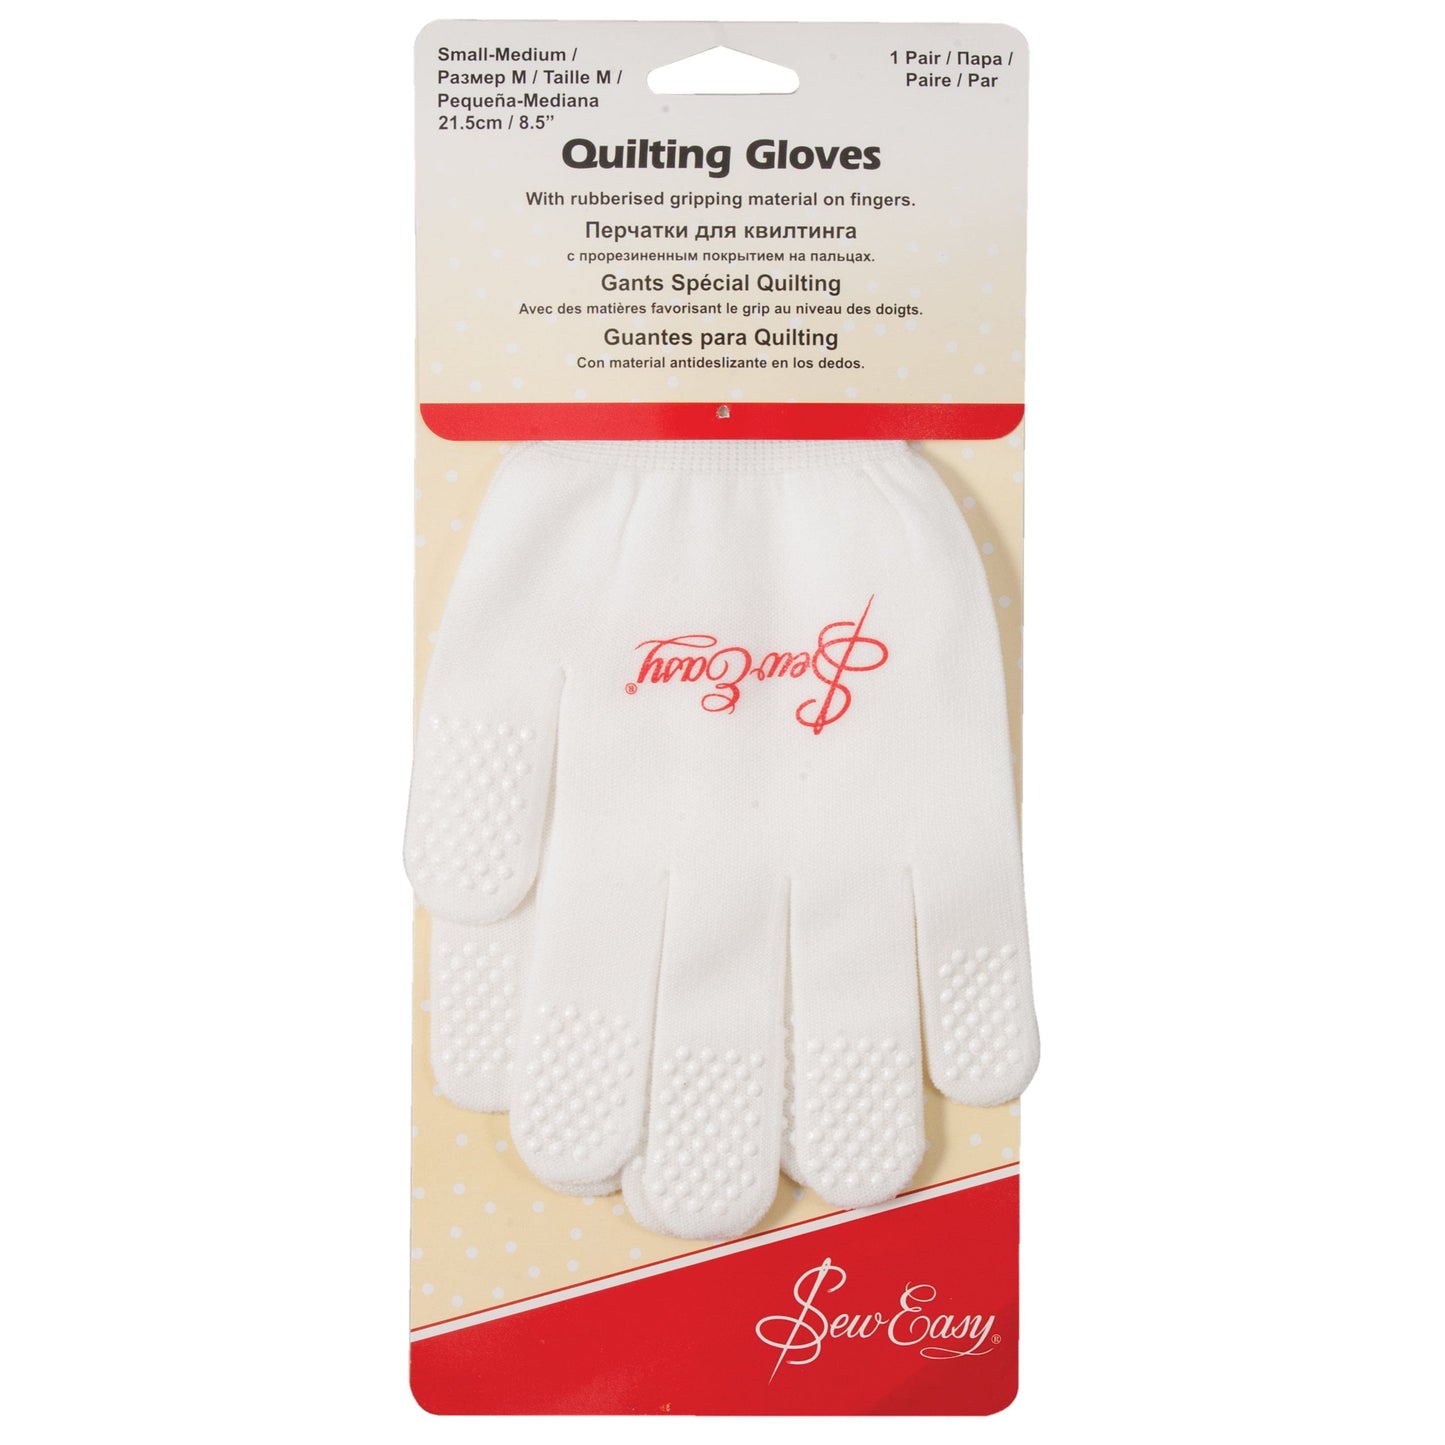 Sew Easy Quilting Gloves (Small-Medium)